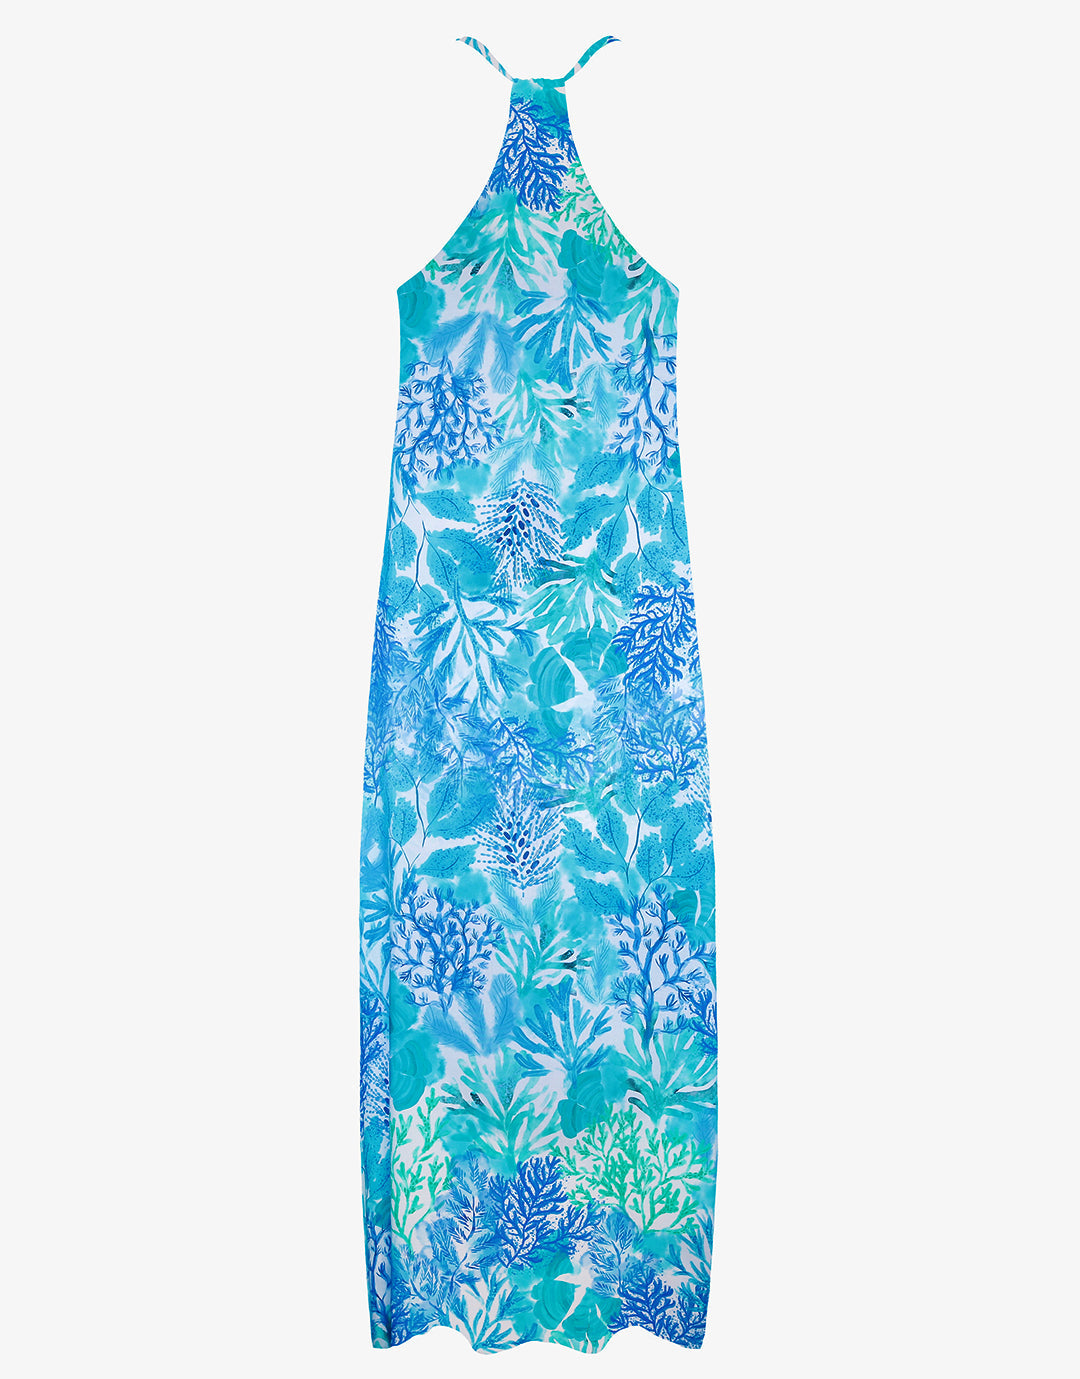 Coral Maxi Dress - Turquoise - Simply Beach UK